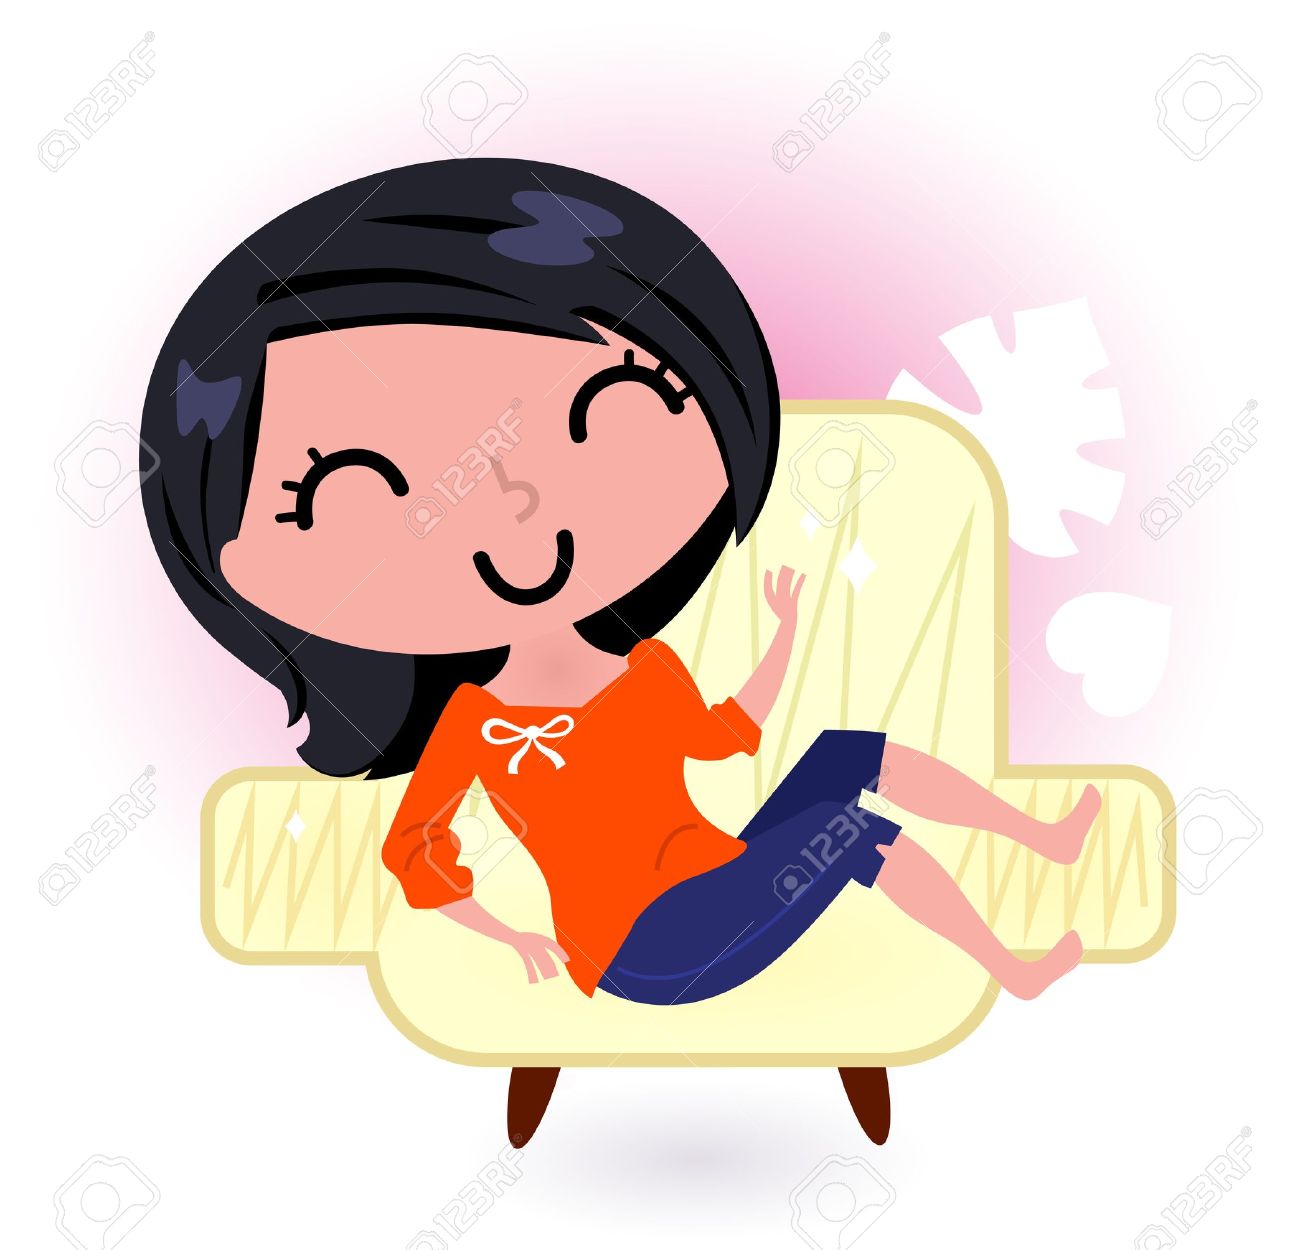 Cute Young Girl In Sofa Royalty Free Cliparts, Vectors, And Stock.